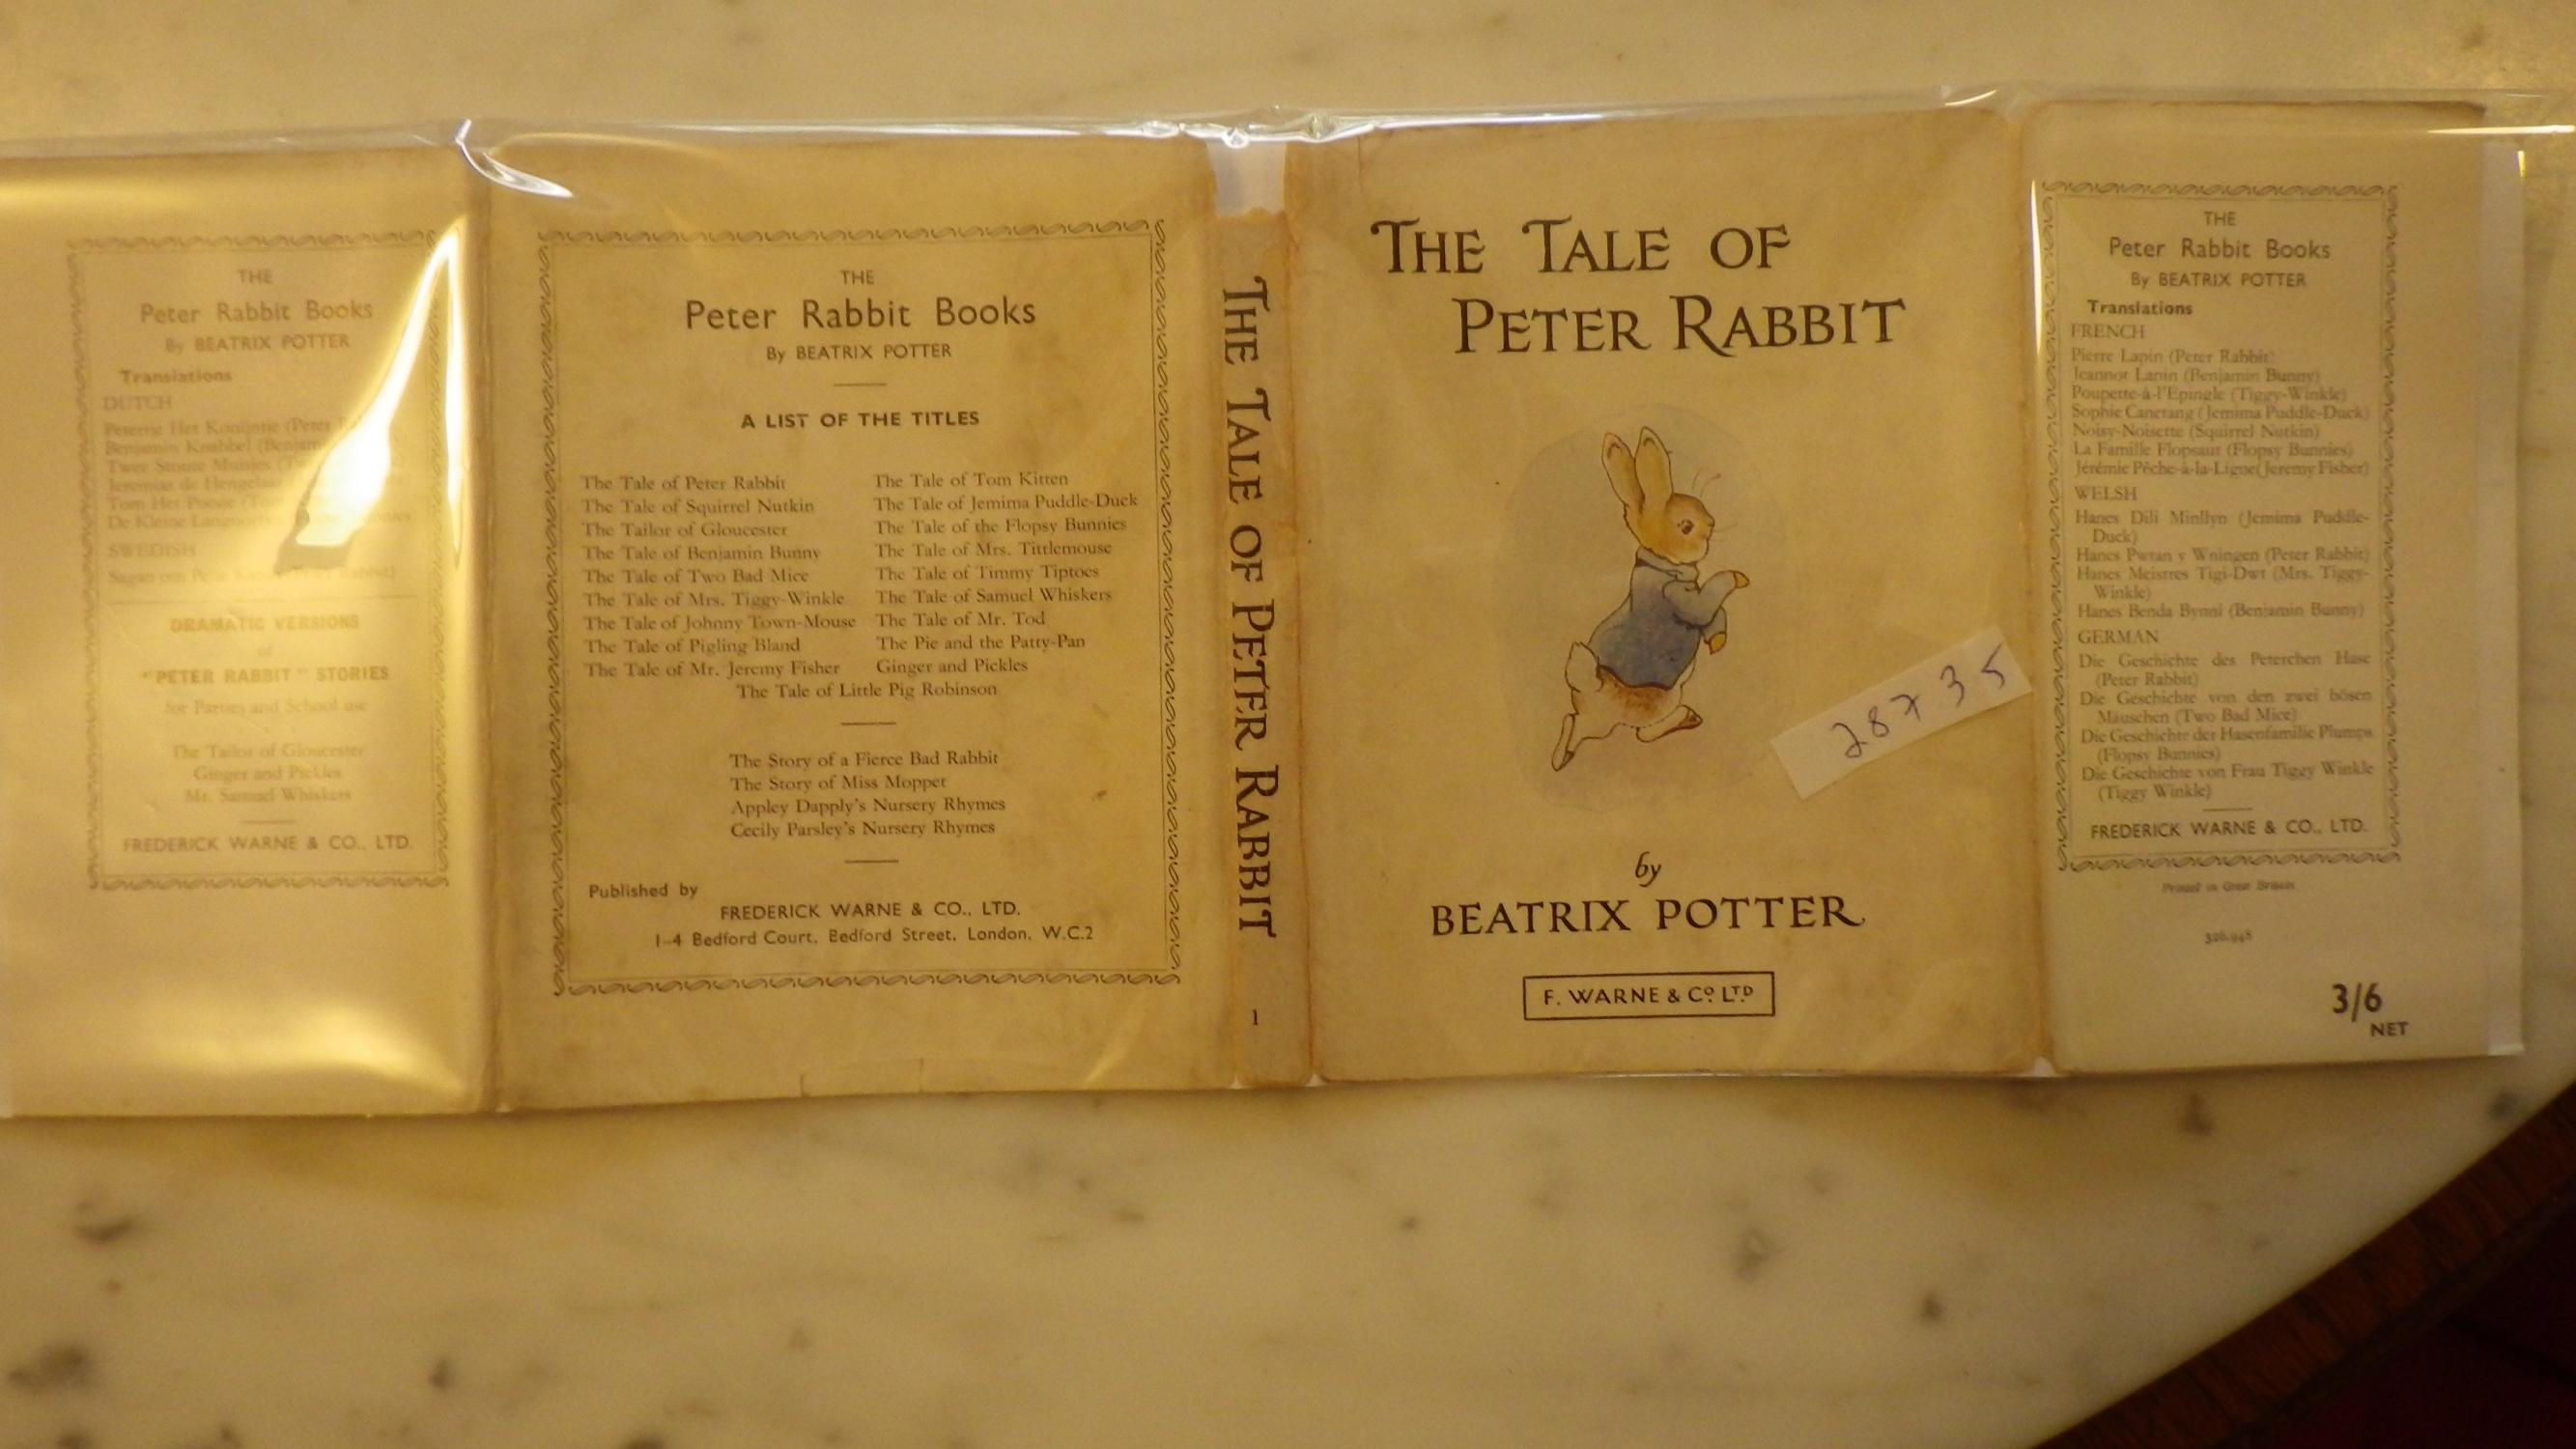 The Tale Of Peter Rabbit Inner Dj Flap 3 6 Net With 2 Sided